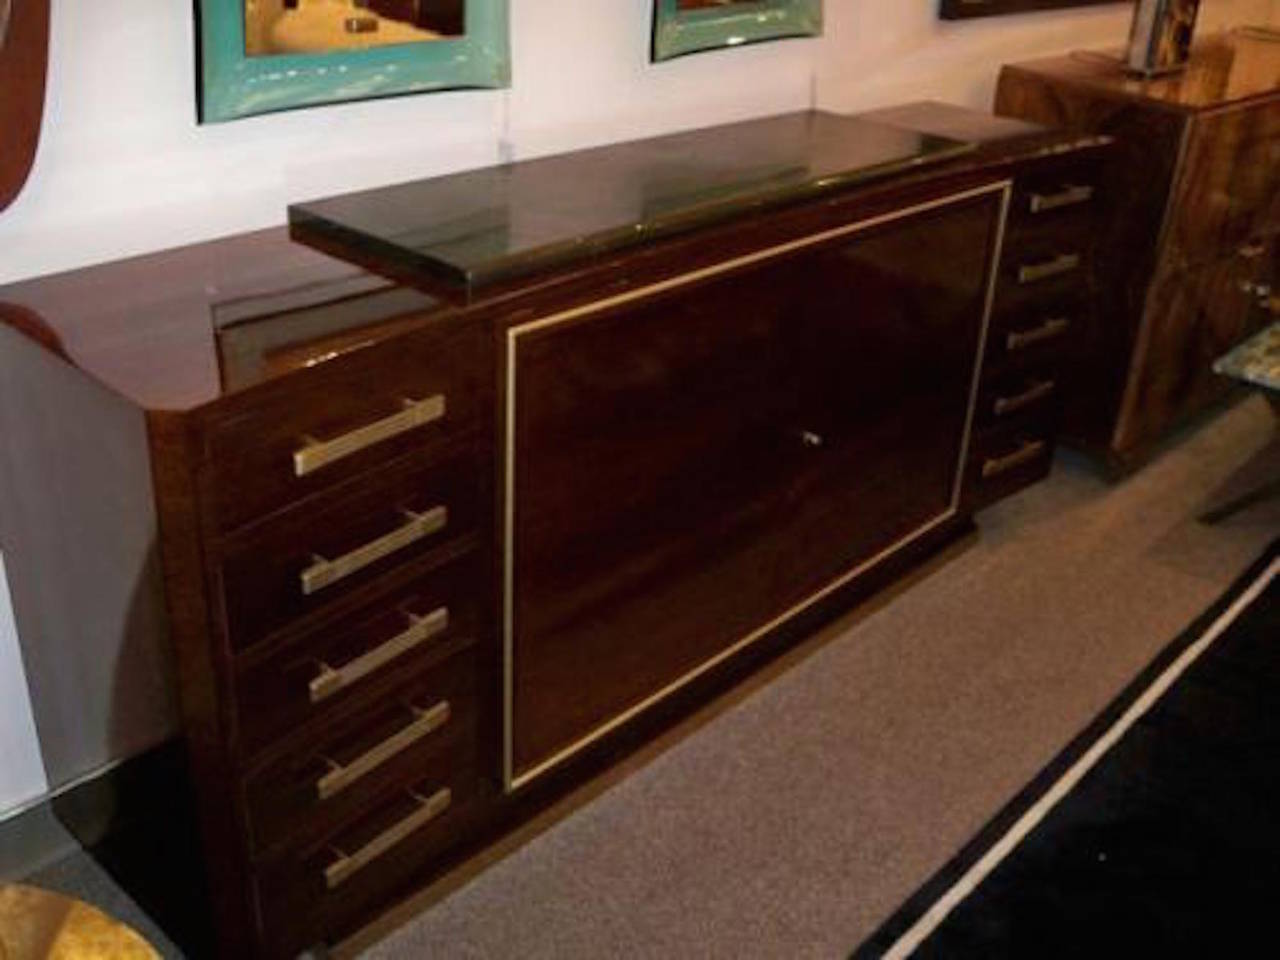 Important sideboard in Walnut featuring a concave bow shaped body which sits on a raised plinth base with a gilt bronze foot. The sideboard also features two central doors with interior shelving banded in gilt bronze which are flanked on either side